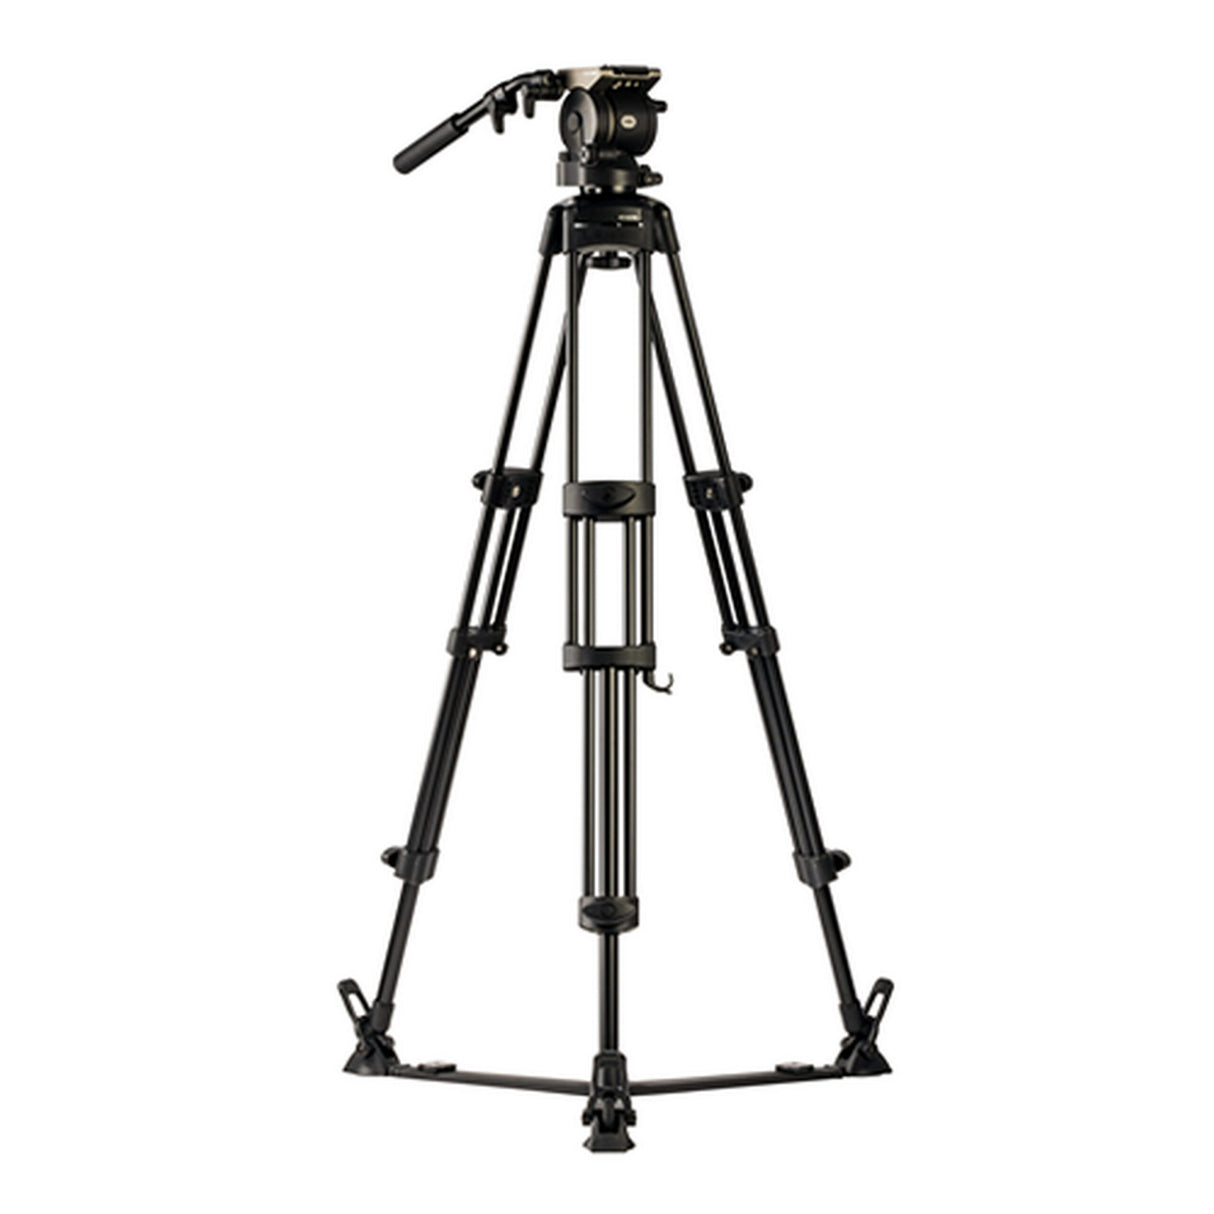 Libec HS-450 Dual Head Tripod System with Floor Spreader